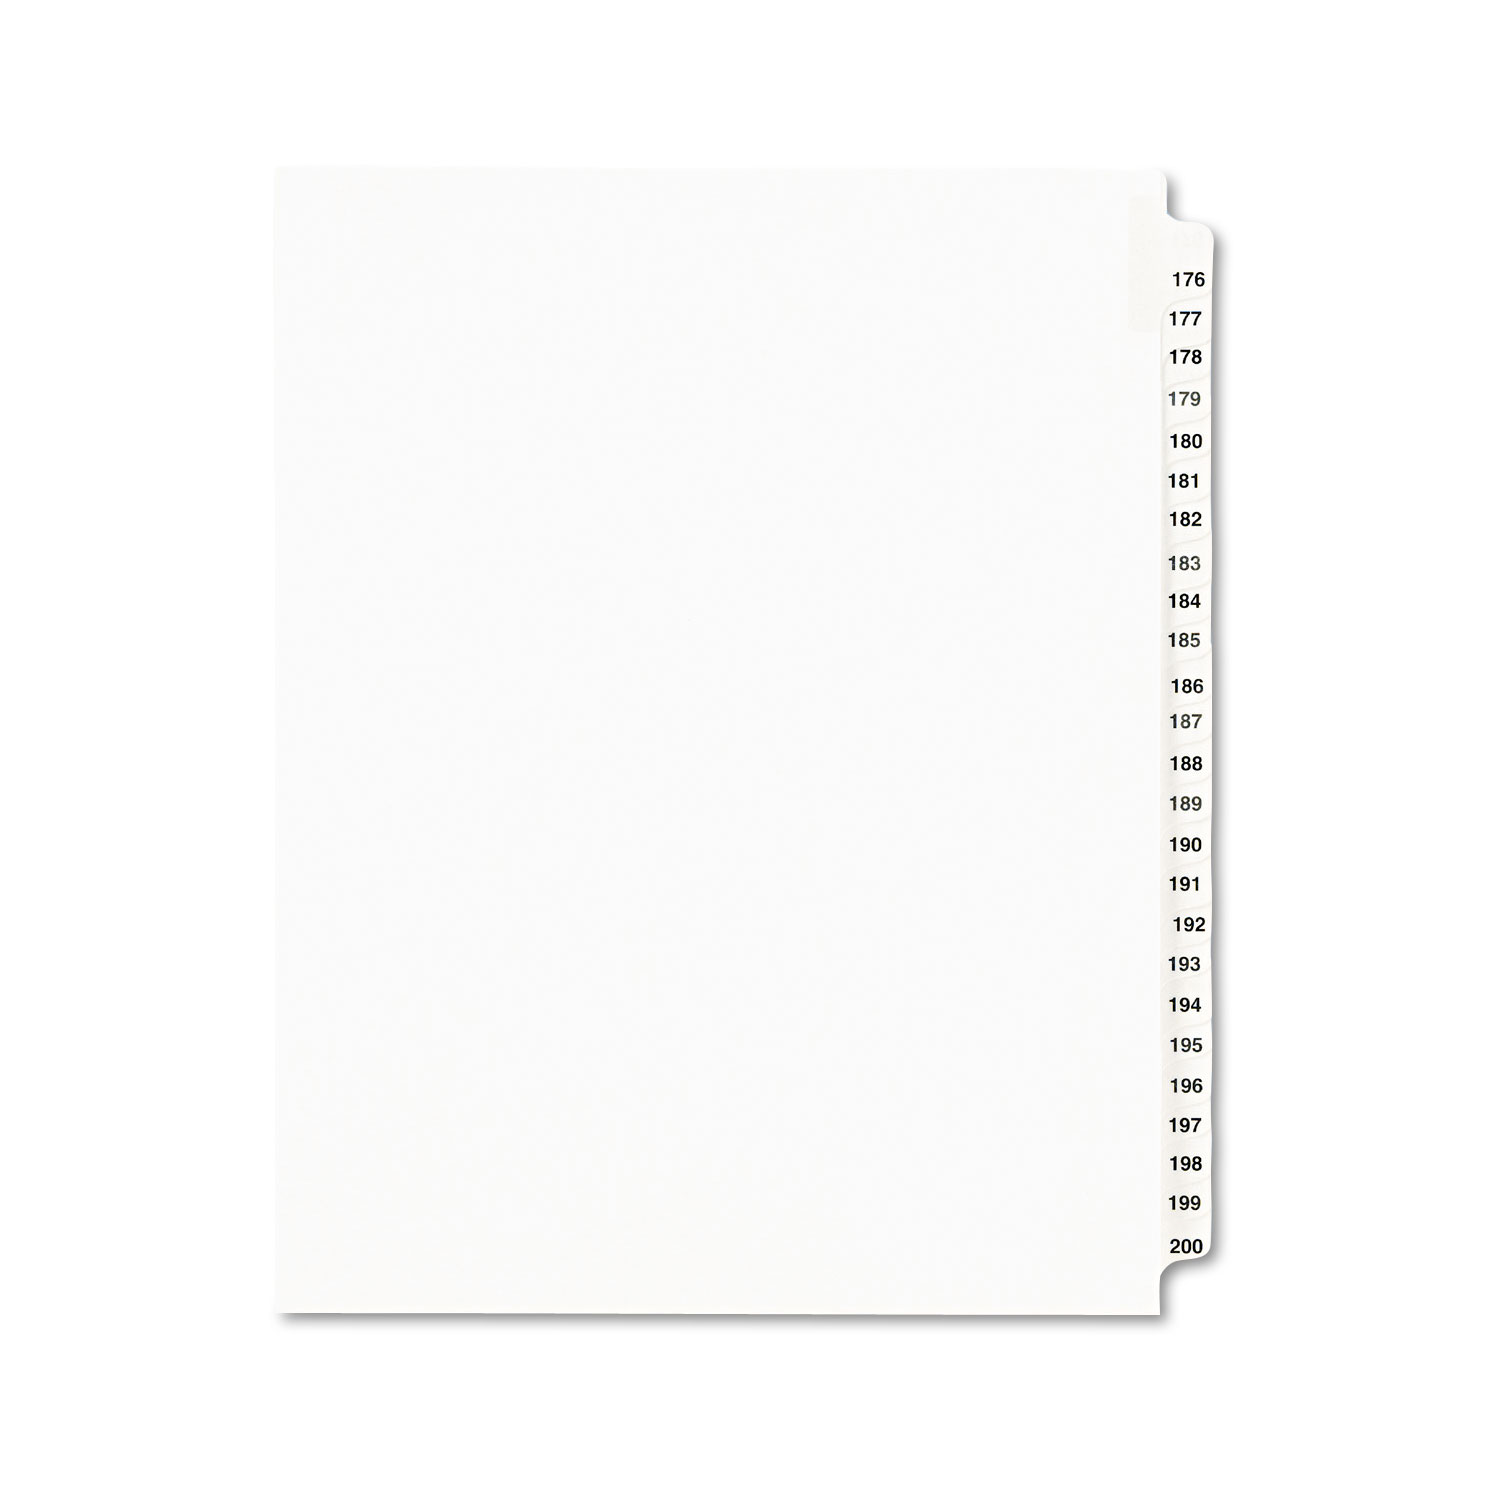  Avery 01337 Preprinted Legal Exhibit Side Tab Index Dividers, Avery Style, 25-Tab, 176 to 200, 11 x 8.5, White, 1 Set (AVE01337) 